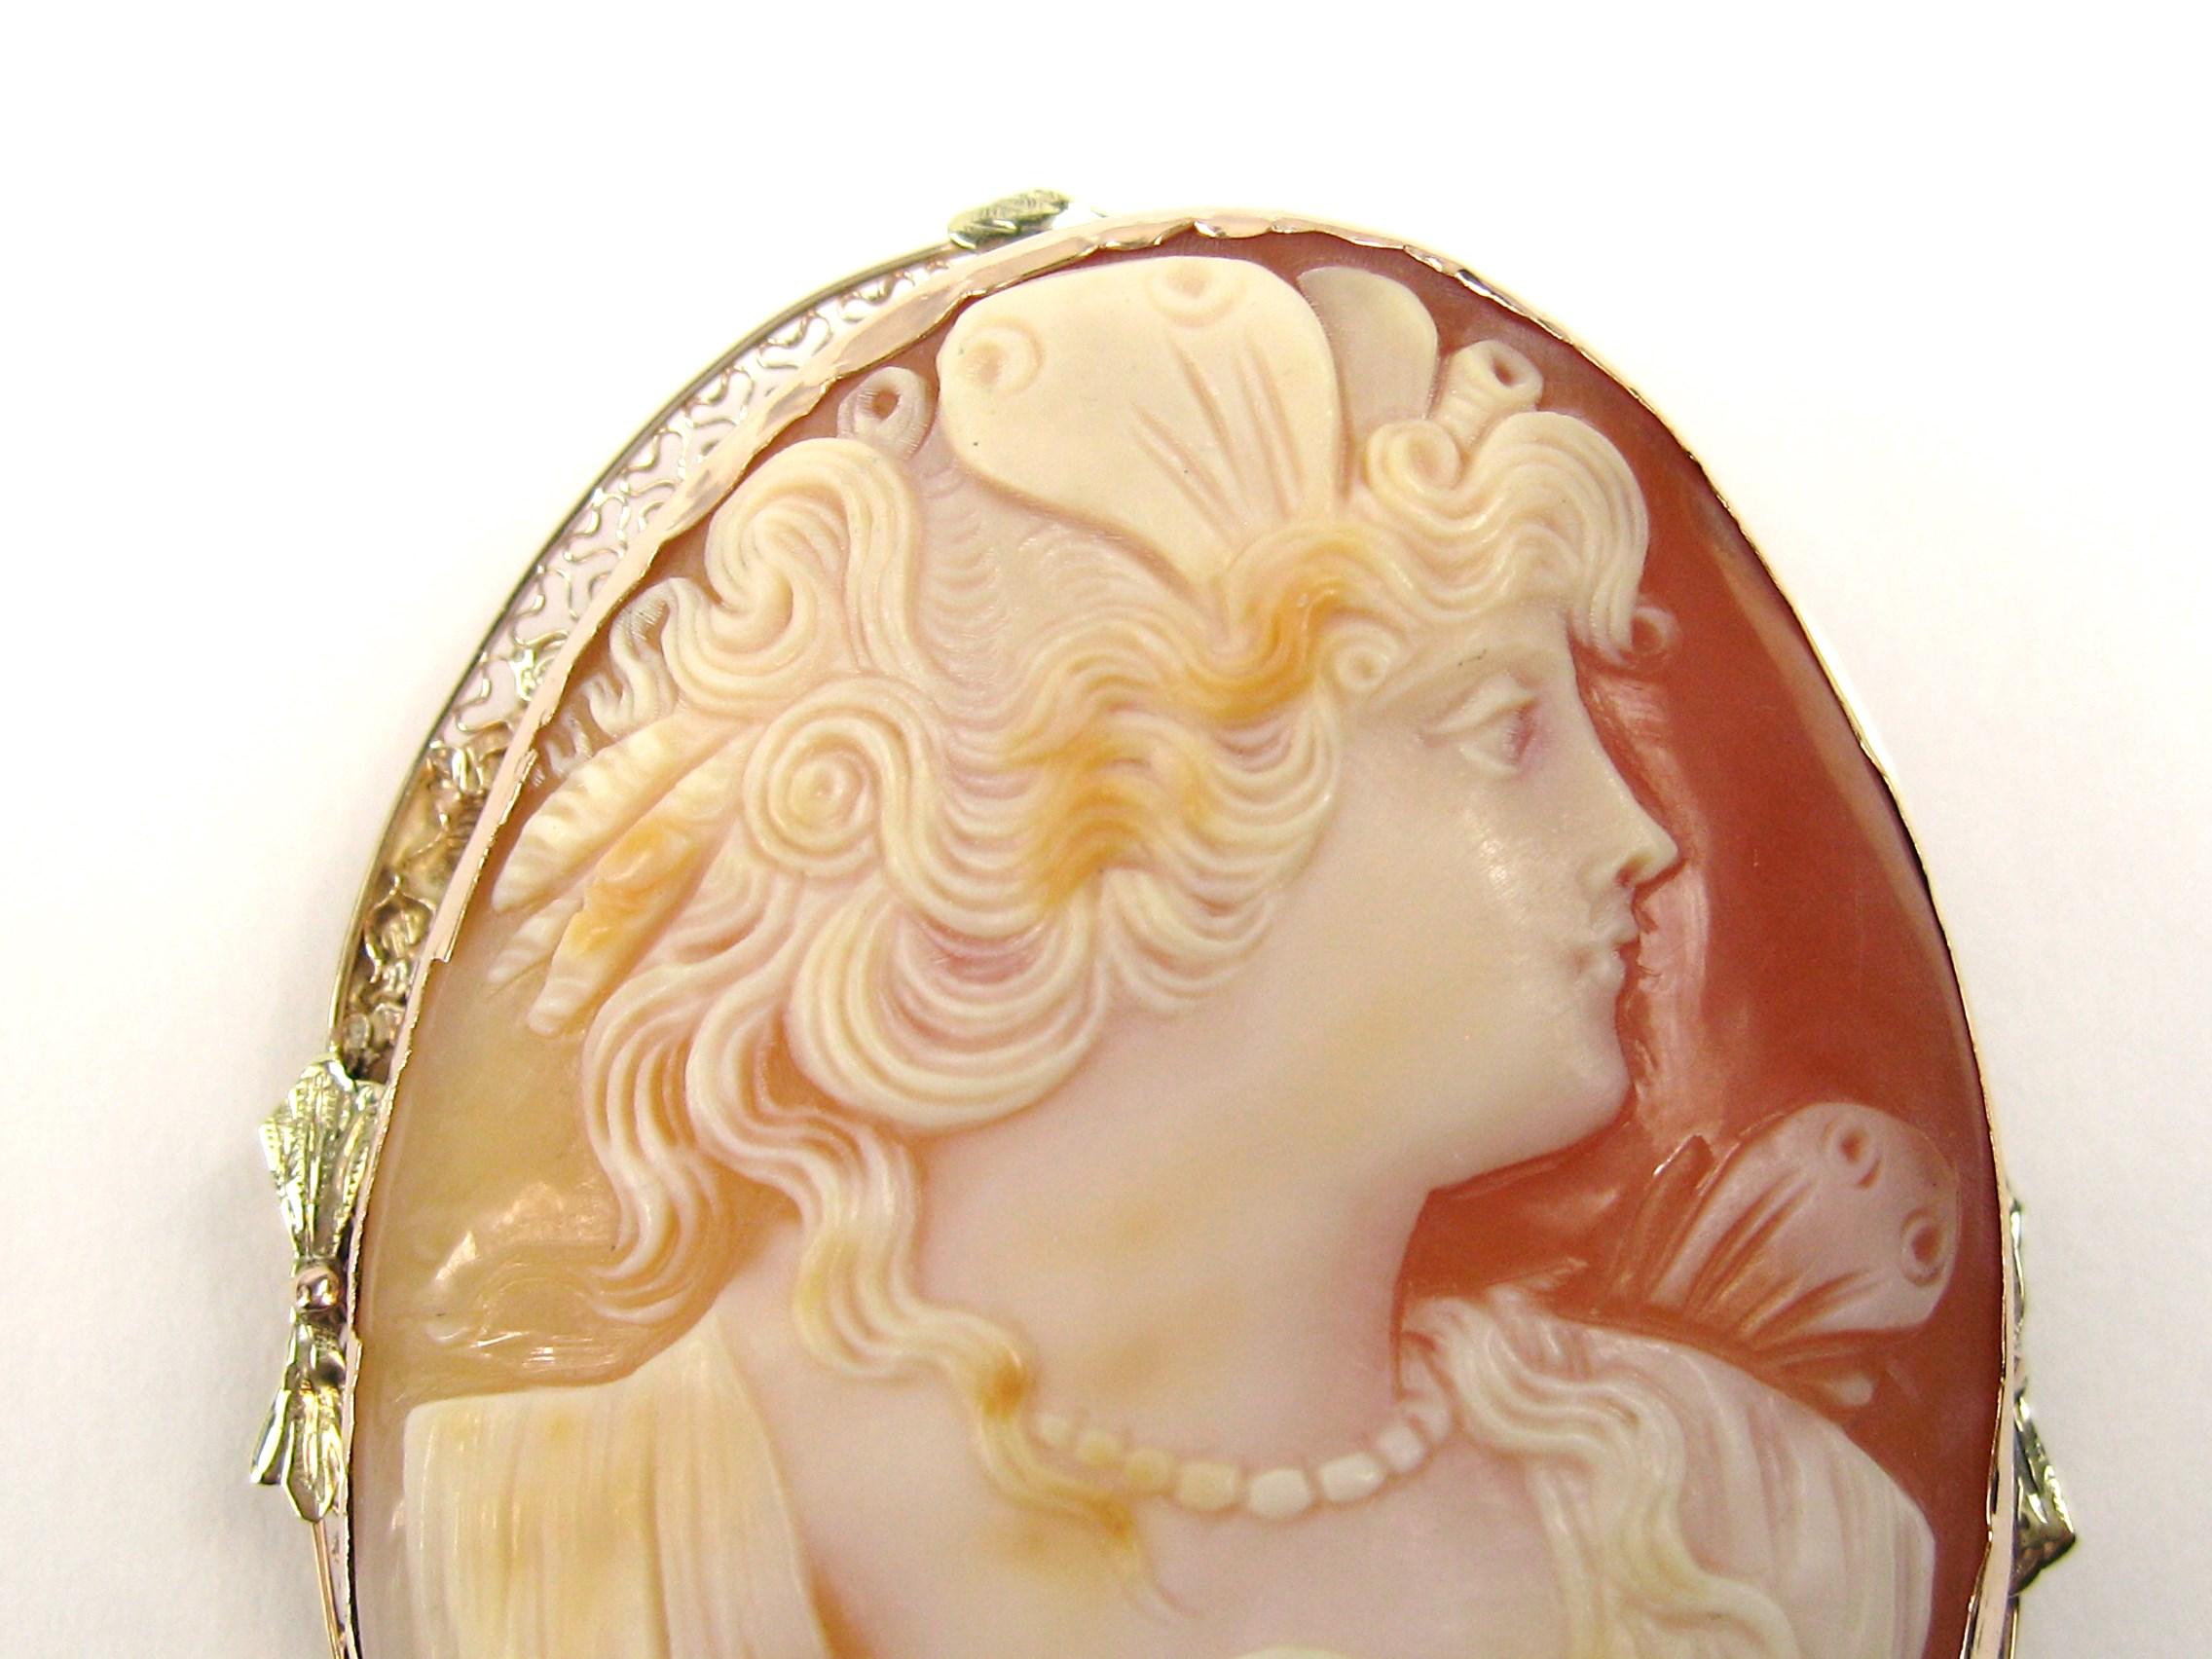 Antique 14 Karat Tri-Colored Gold Cameo Brooch Pendant In Good Condition For Sale In Wallkill, NY